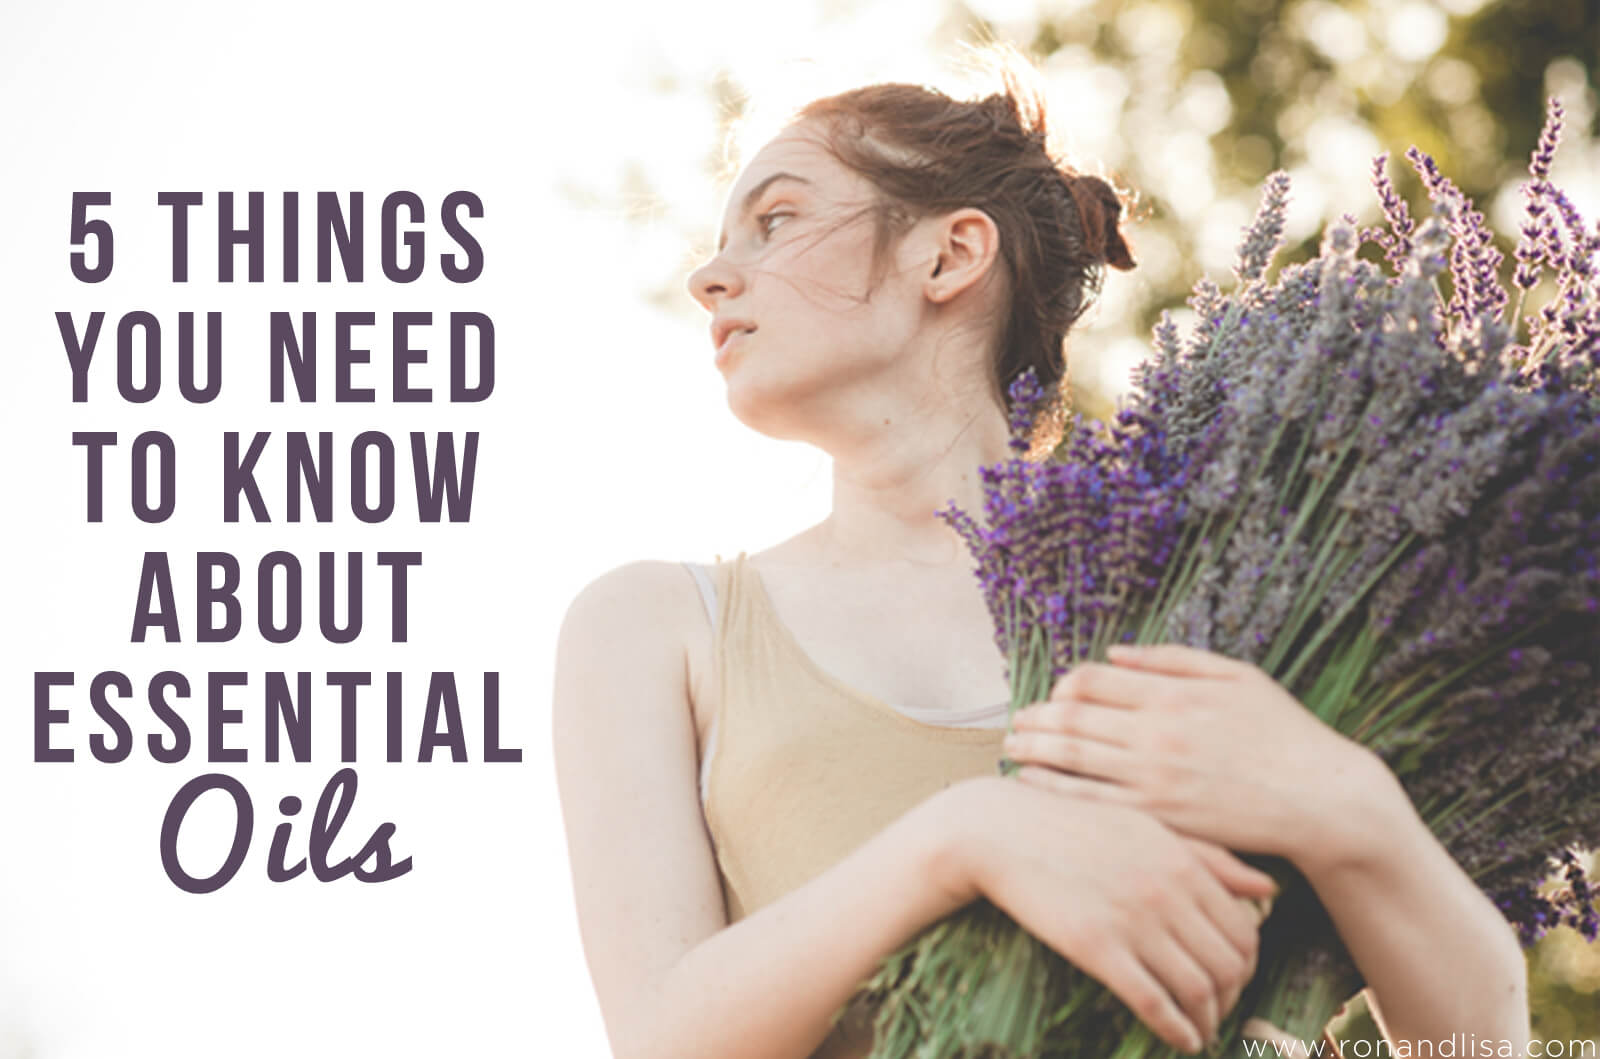 5 Things You Need To Know About Essential Oils